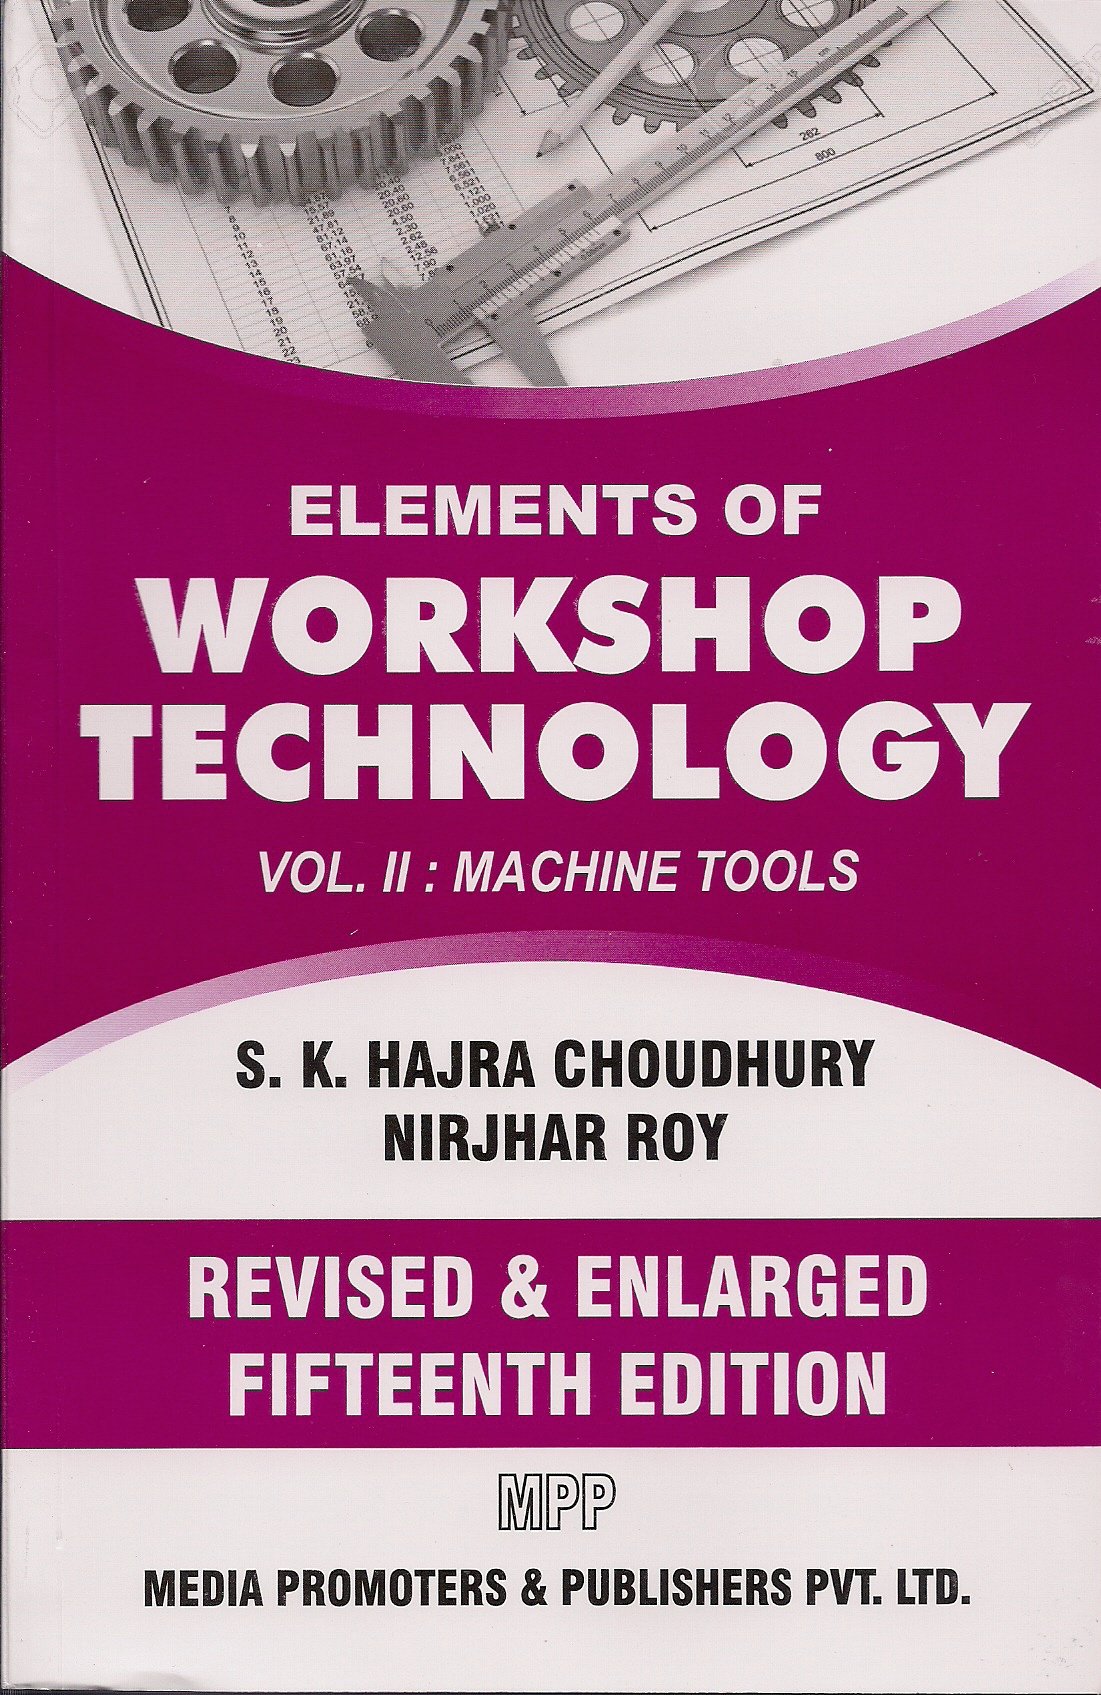 elements of workshop technology by hajra choudhary pdf file